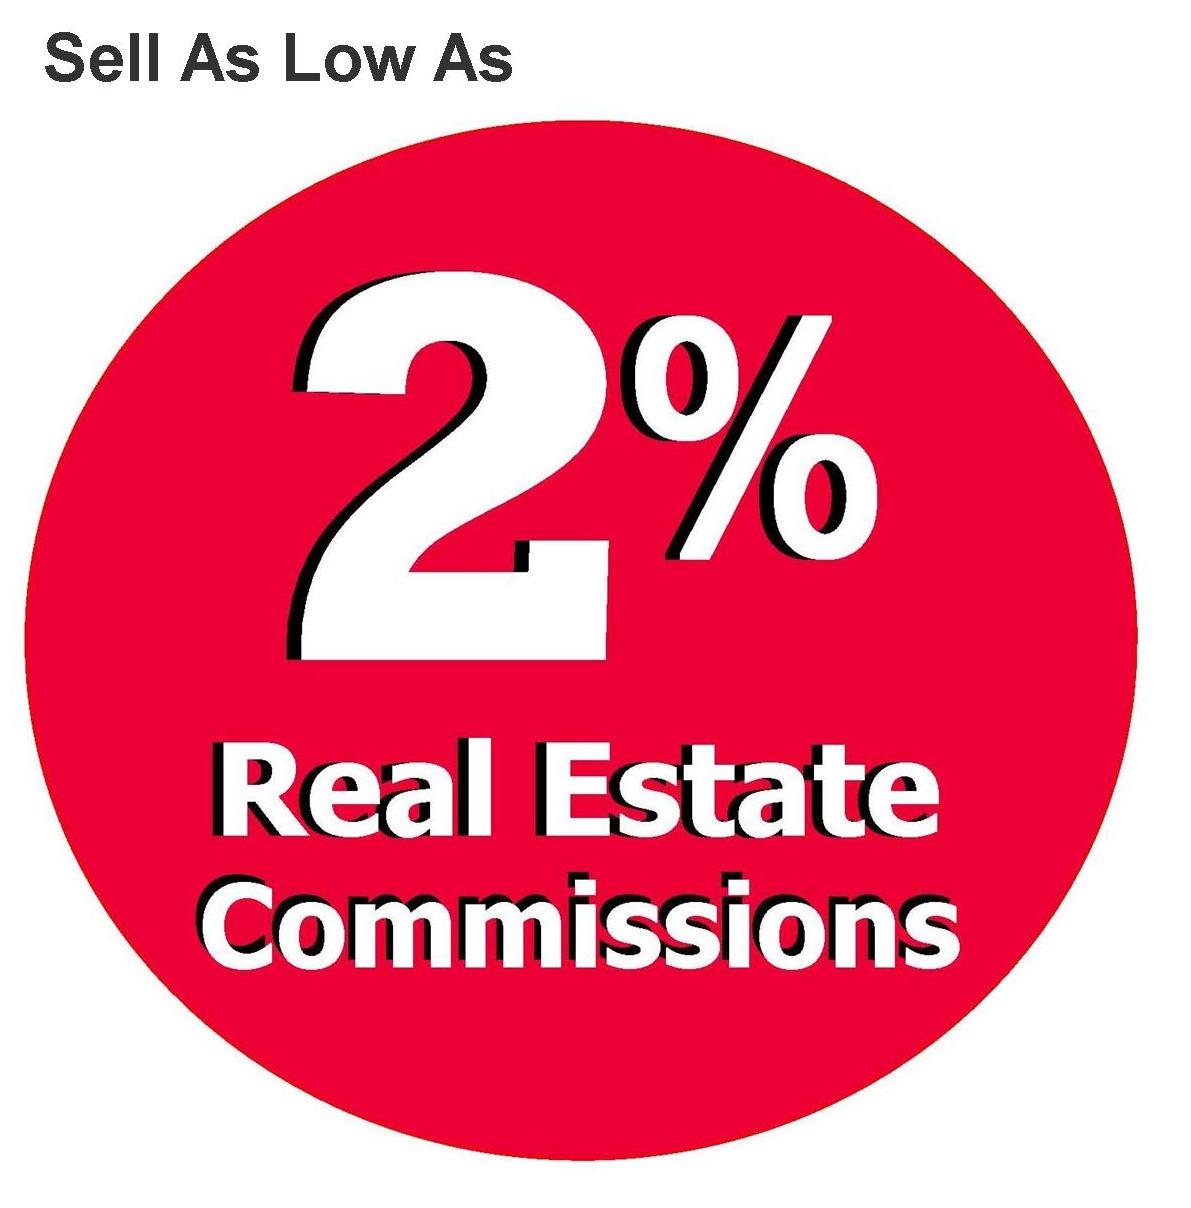 2% Real Estate Commission